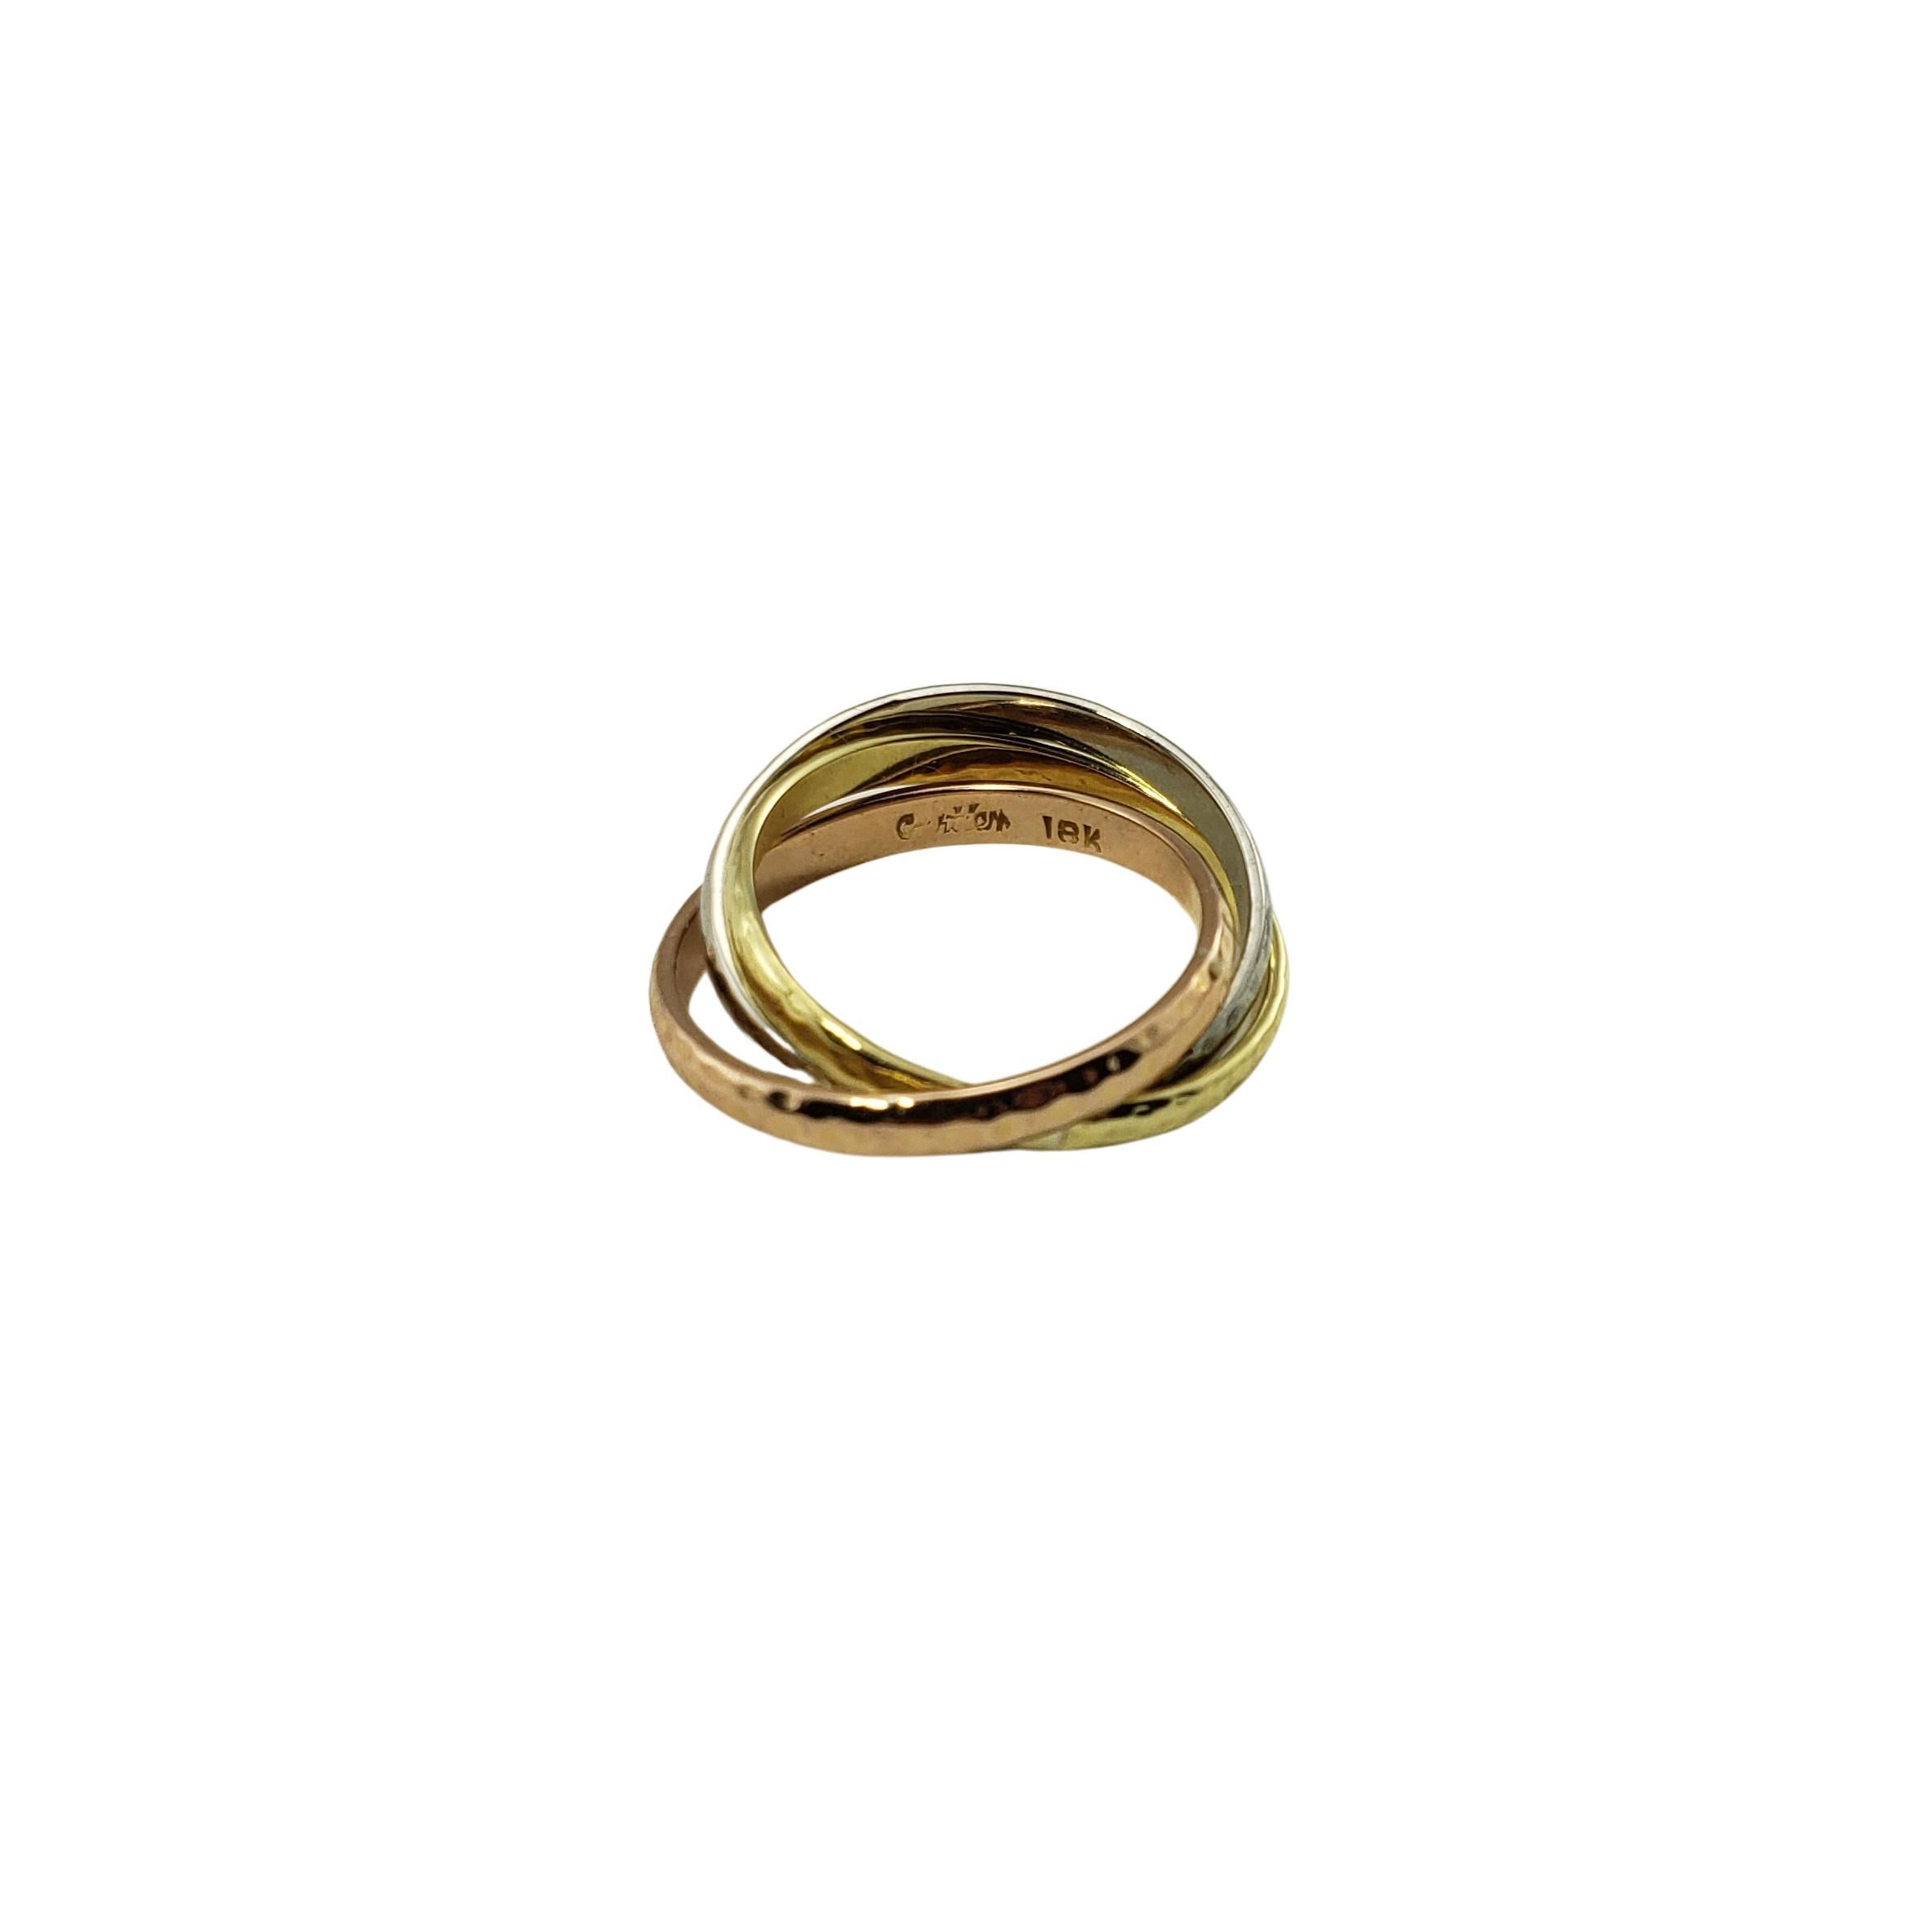 Cartier 18 Karat Tricolor Trinity Rolling Ring-

This elegant Cartier rolling ring features a trio of connected bands crafted in 18K yellow, white and rose gold.  
Width of each band: 3 mm.

Ring Size: 6.5

Weight:  4.1 dwt. /  6.4 gr.

Hallmark: 